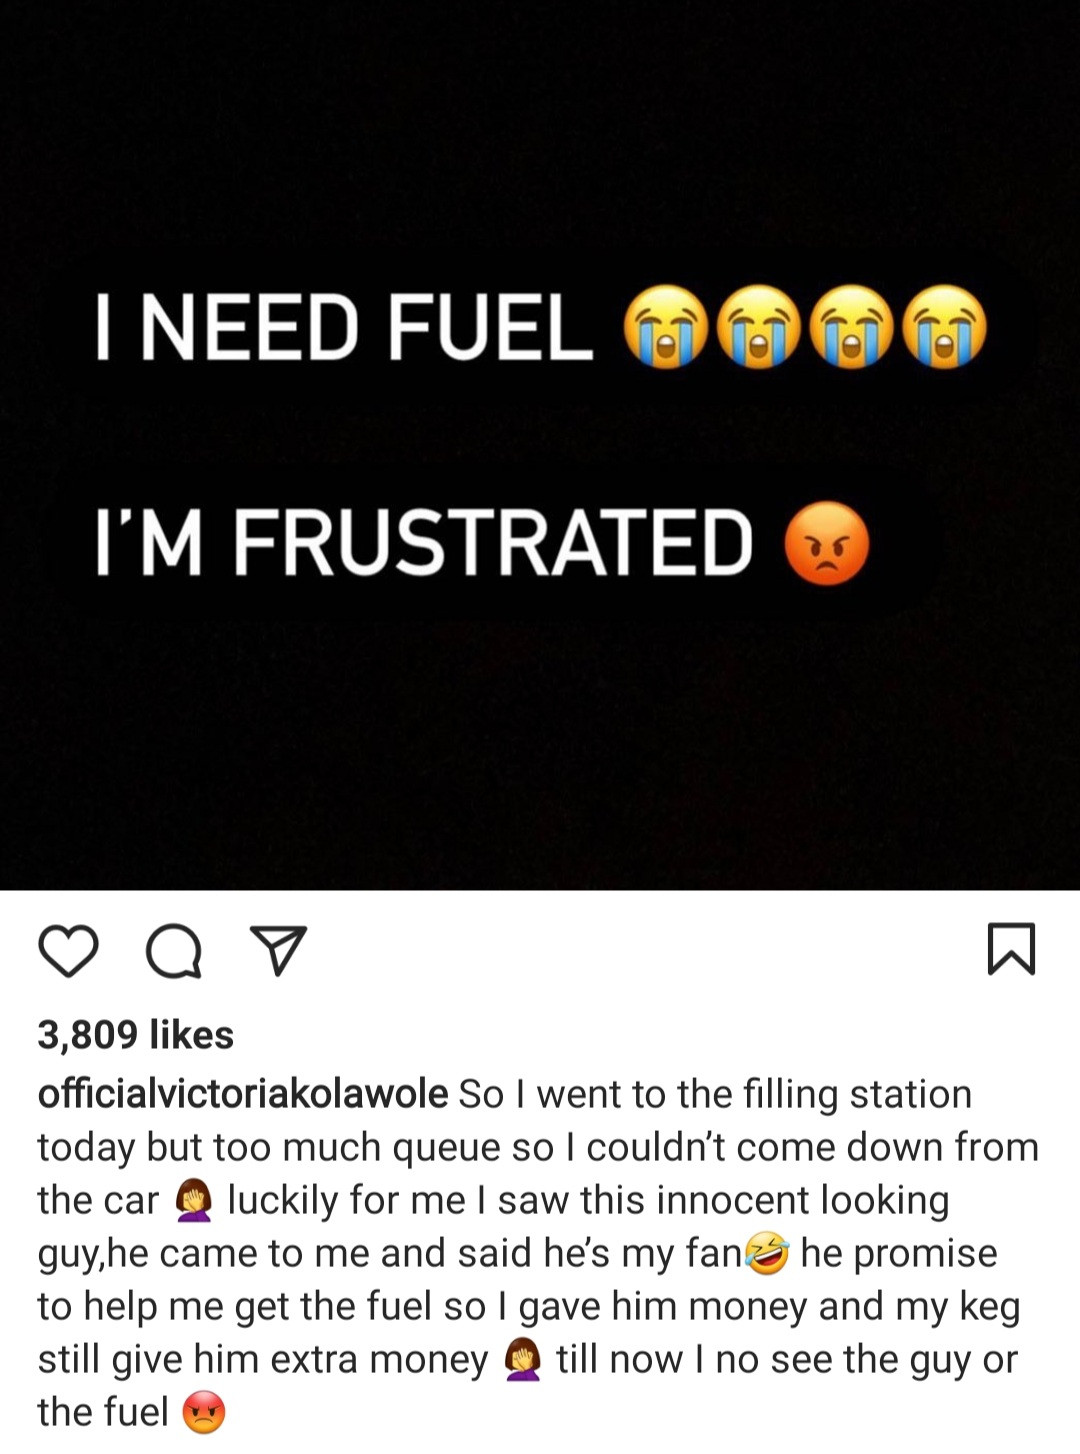 Actress Victoria Kolawole cries out after being duped while trying to buy fuel